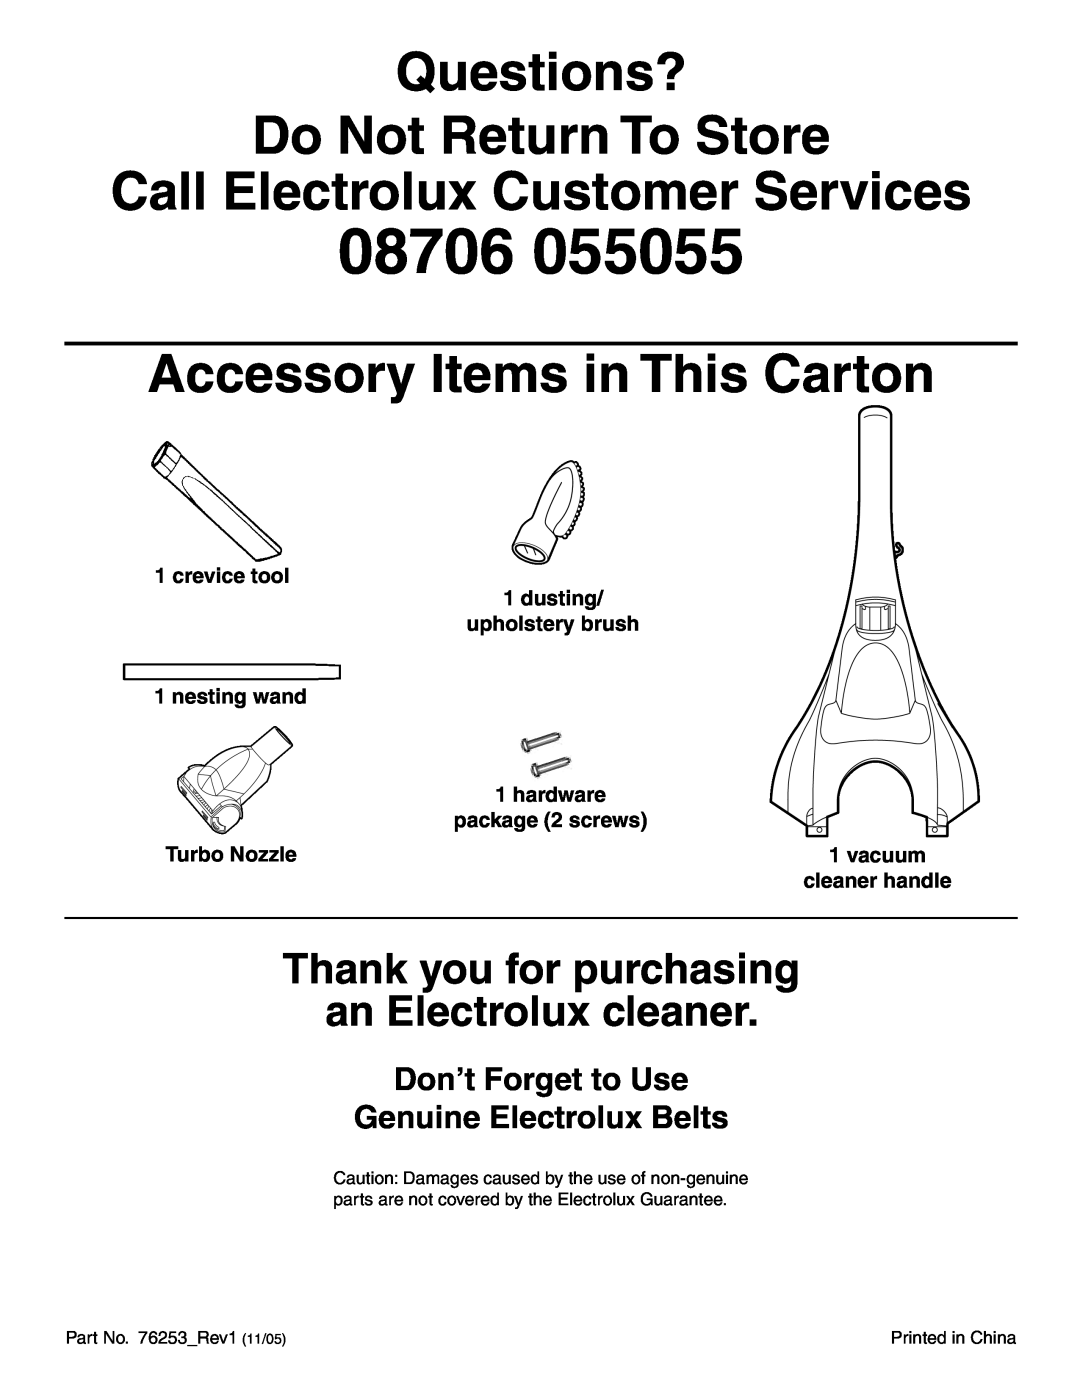 Electrolux Z5600 Series Questions? Do Not Return To Store Call Electrolux Customer Services, Turbo Nozzle, vacuum, 08706 